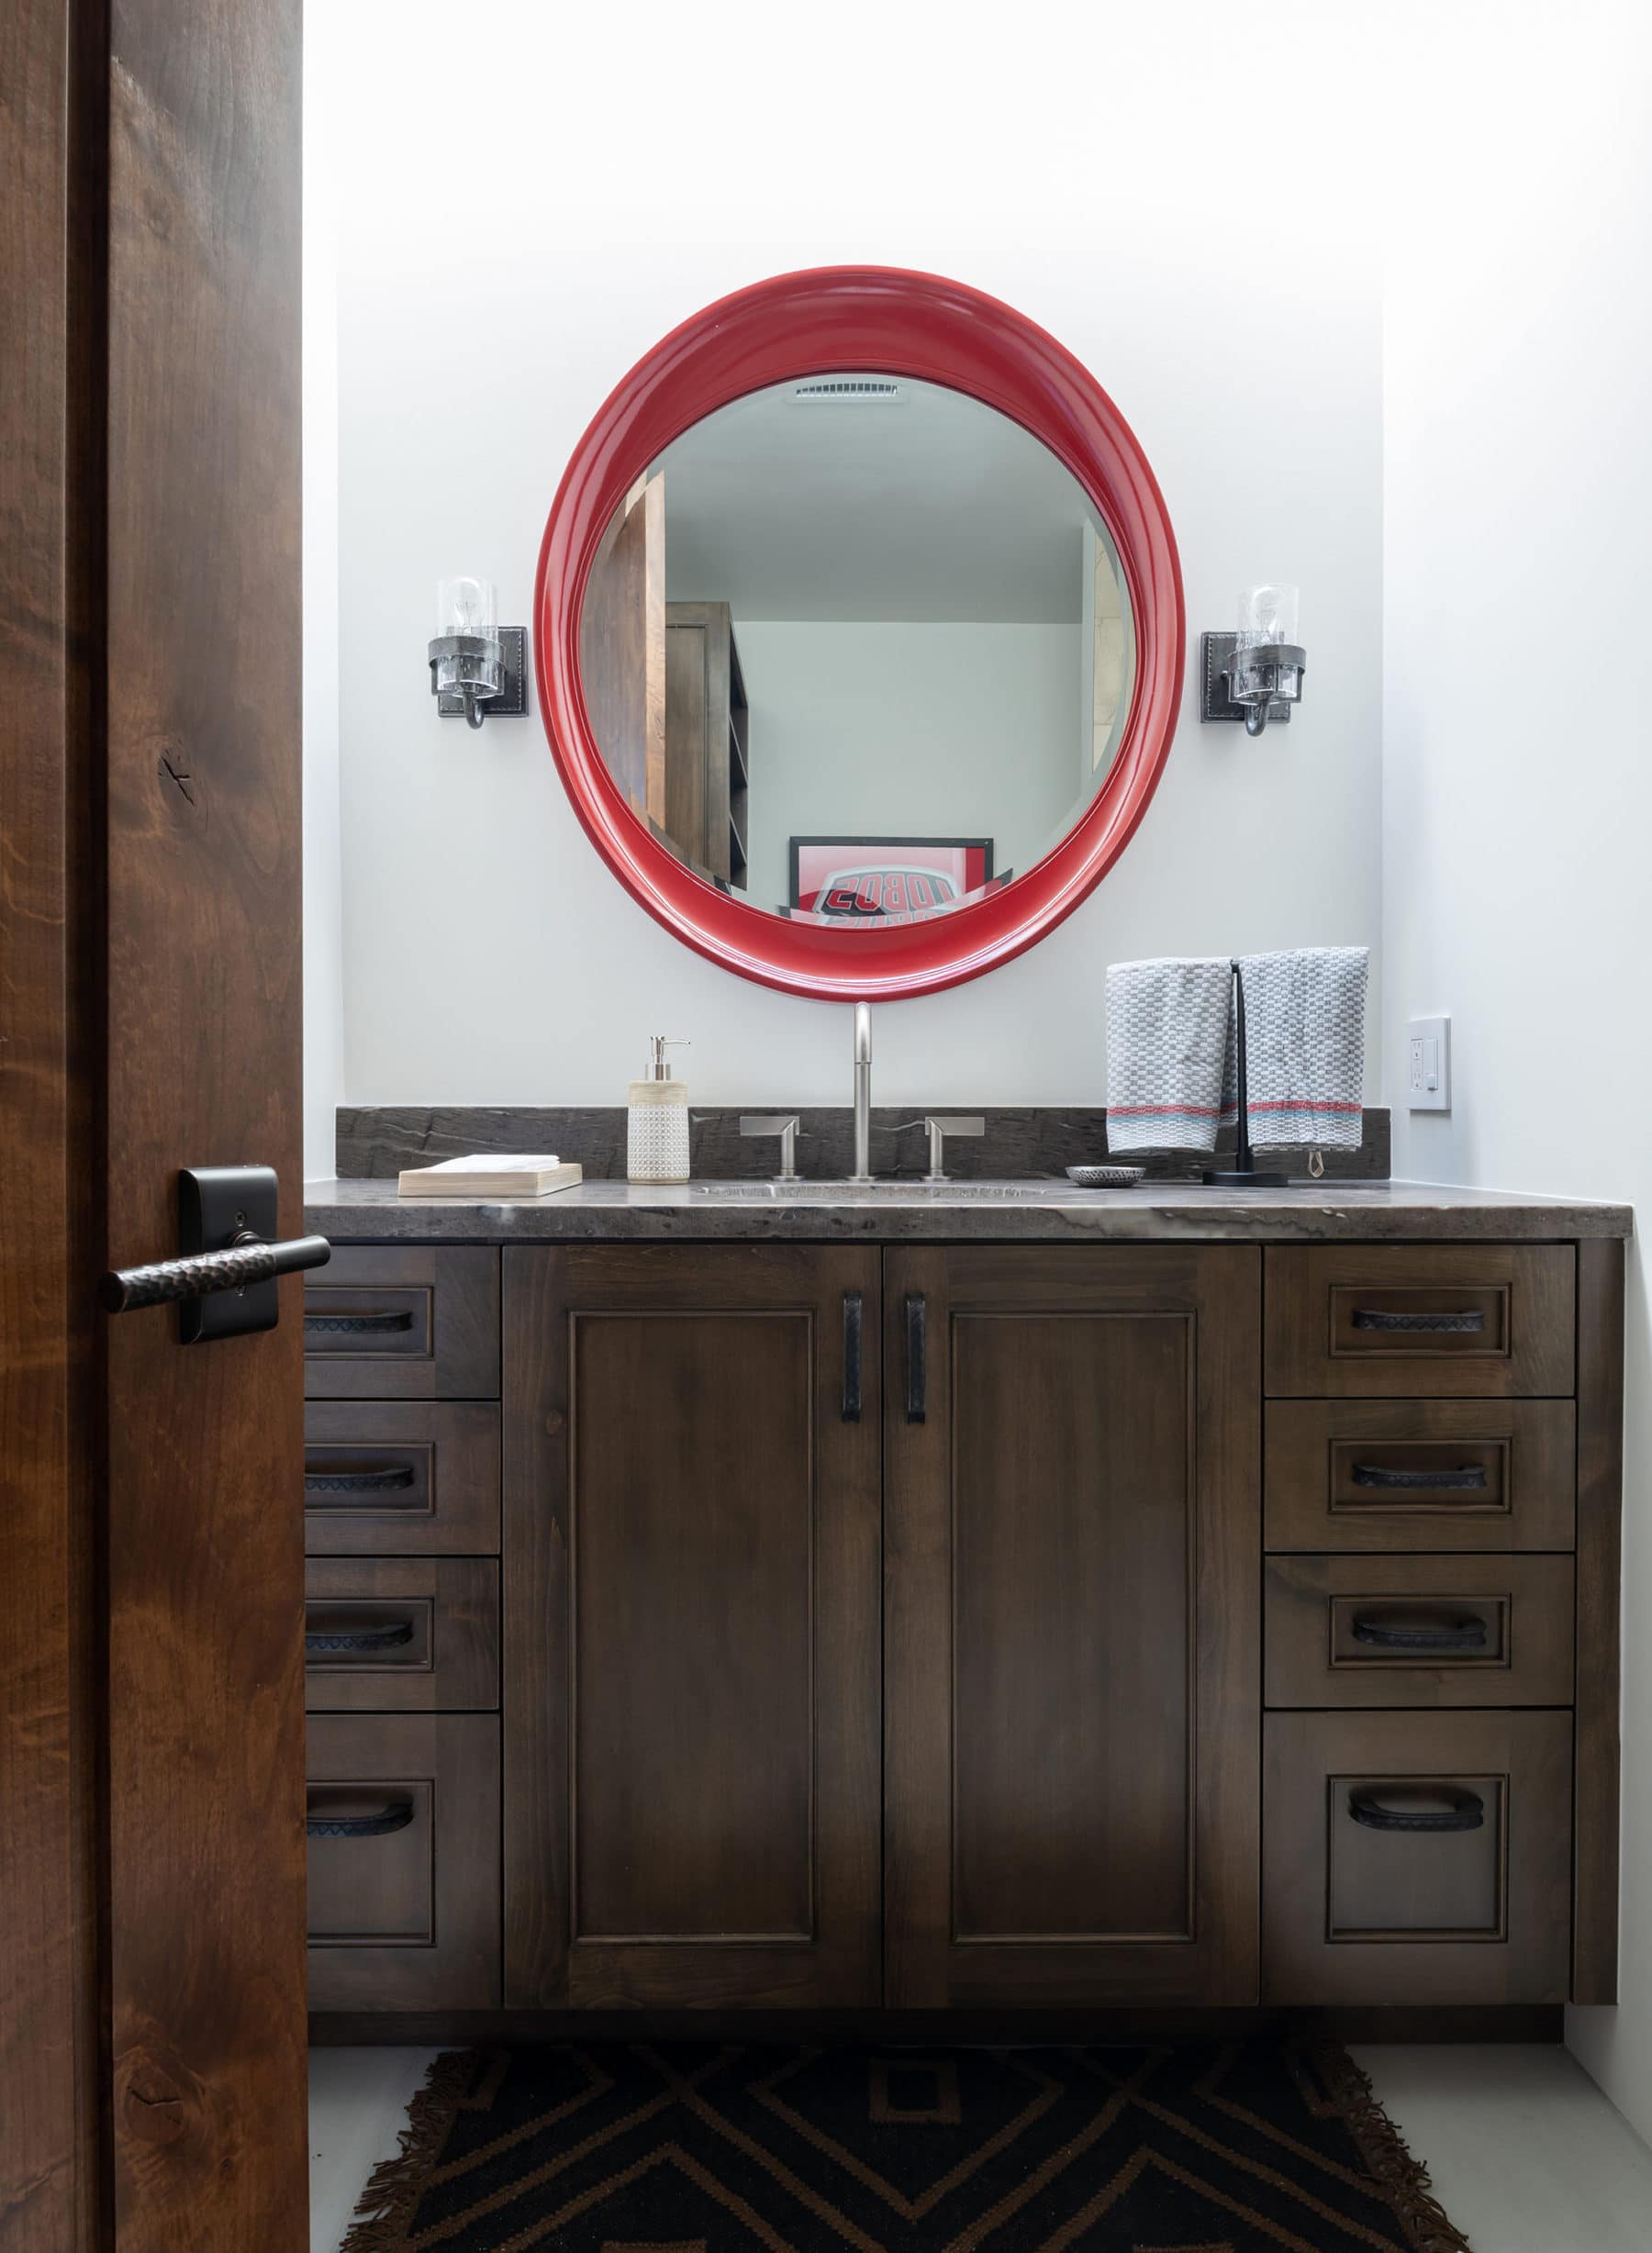 The mirror adds a beautiful pop of color to the guest bathroom